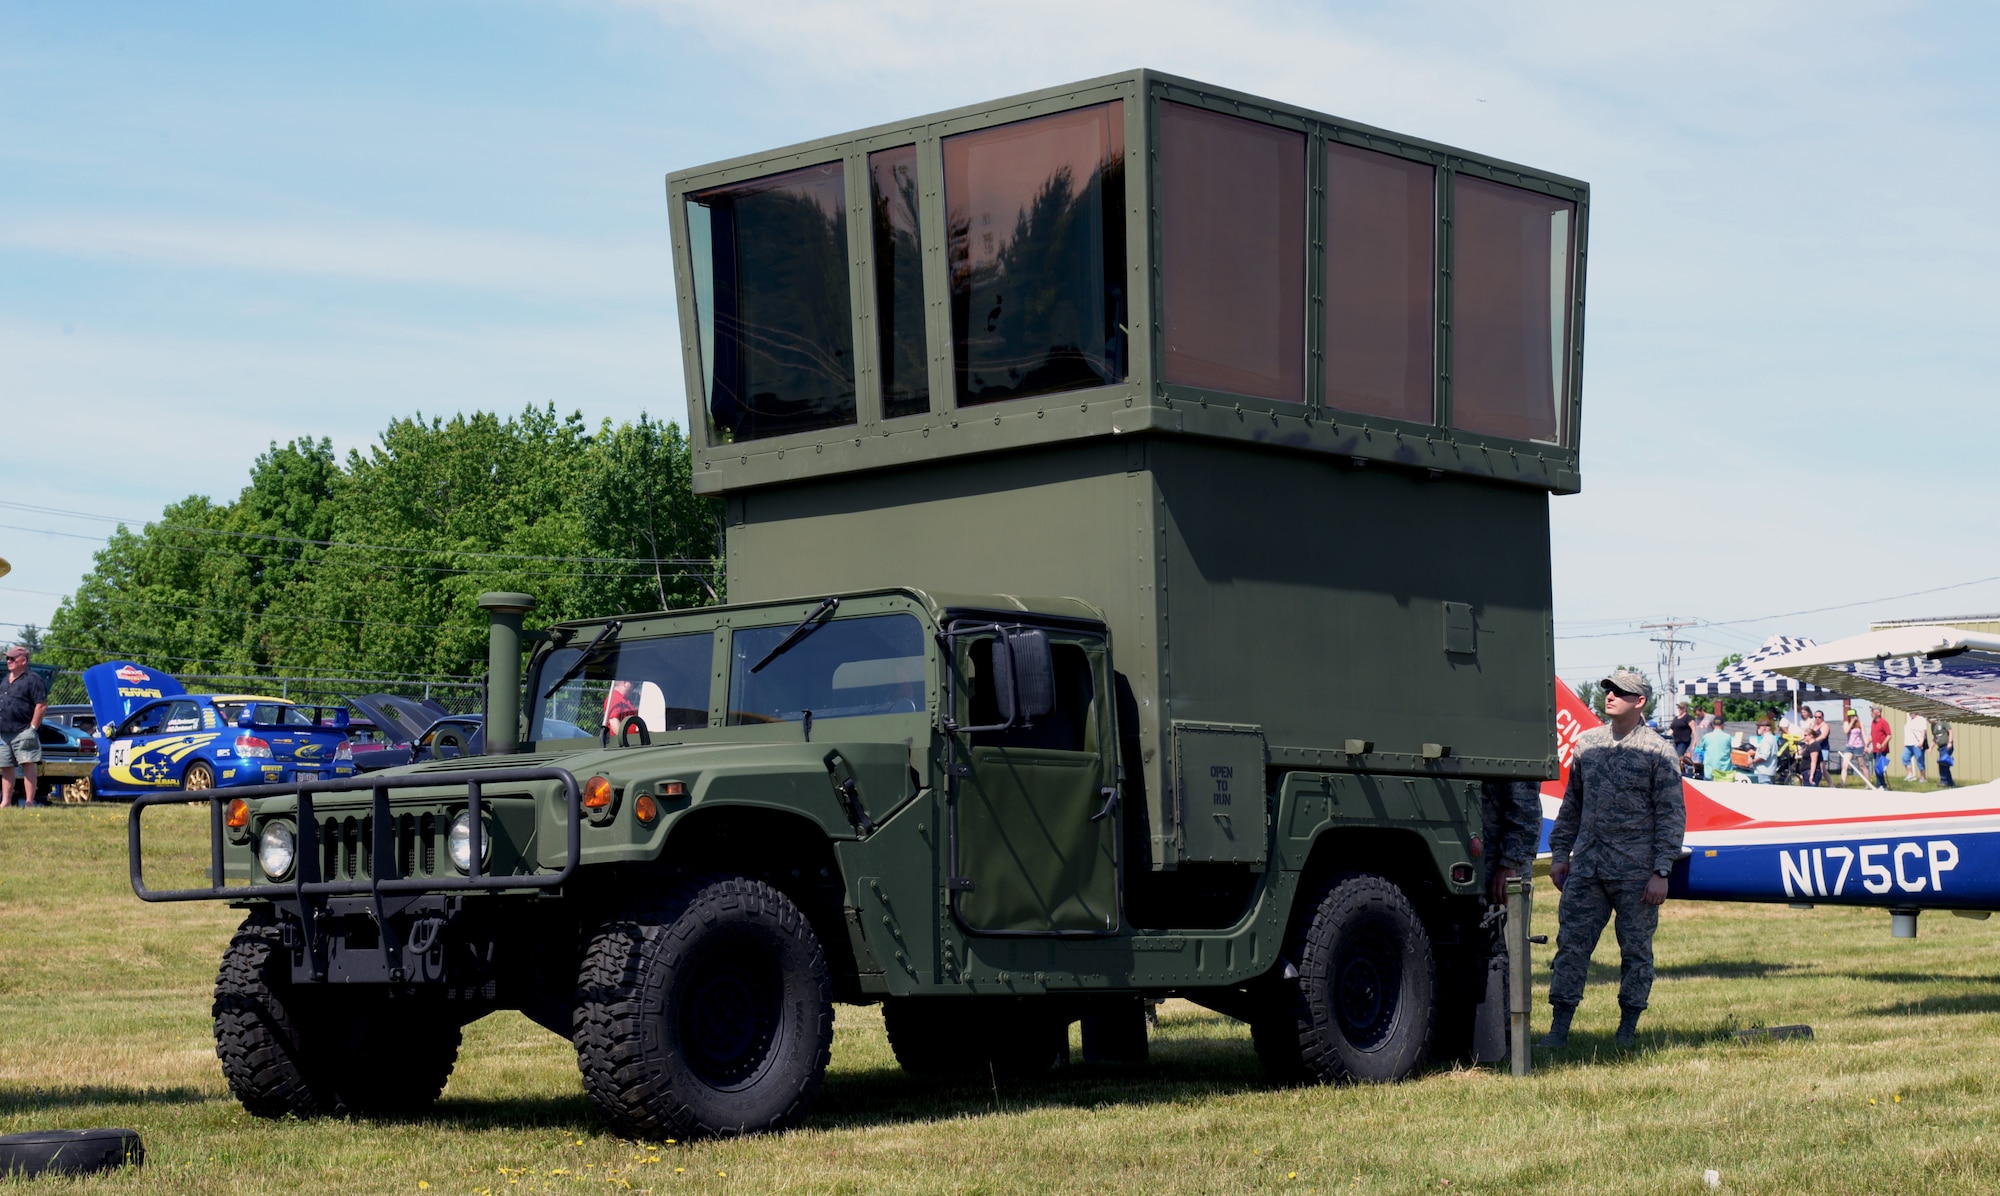 The 260th Air Traffic Control Squadron displayed their MSN-7 Mobile Control Tower at the Wings and Wheels community event in Rochester, N.H. June 4, 2016. The Airmen greeted and spoke with community members and families attending the event, and showed them how MSN-7 can be used for more than just military purposes. (U.S. Air National Guard photo by Airman 1st Class Ashlyn J. Correia)